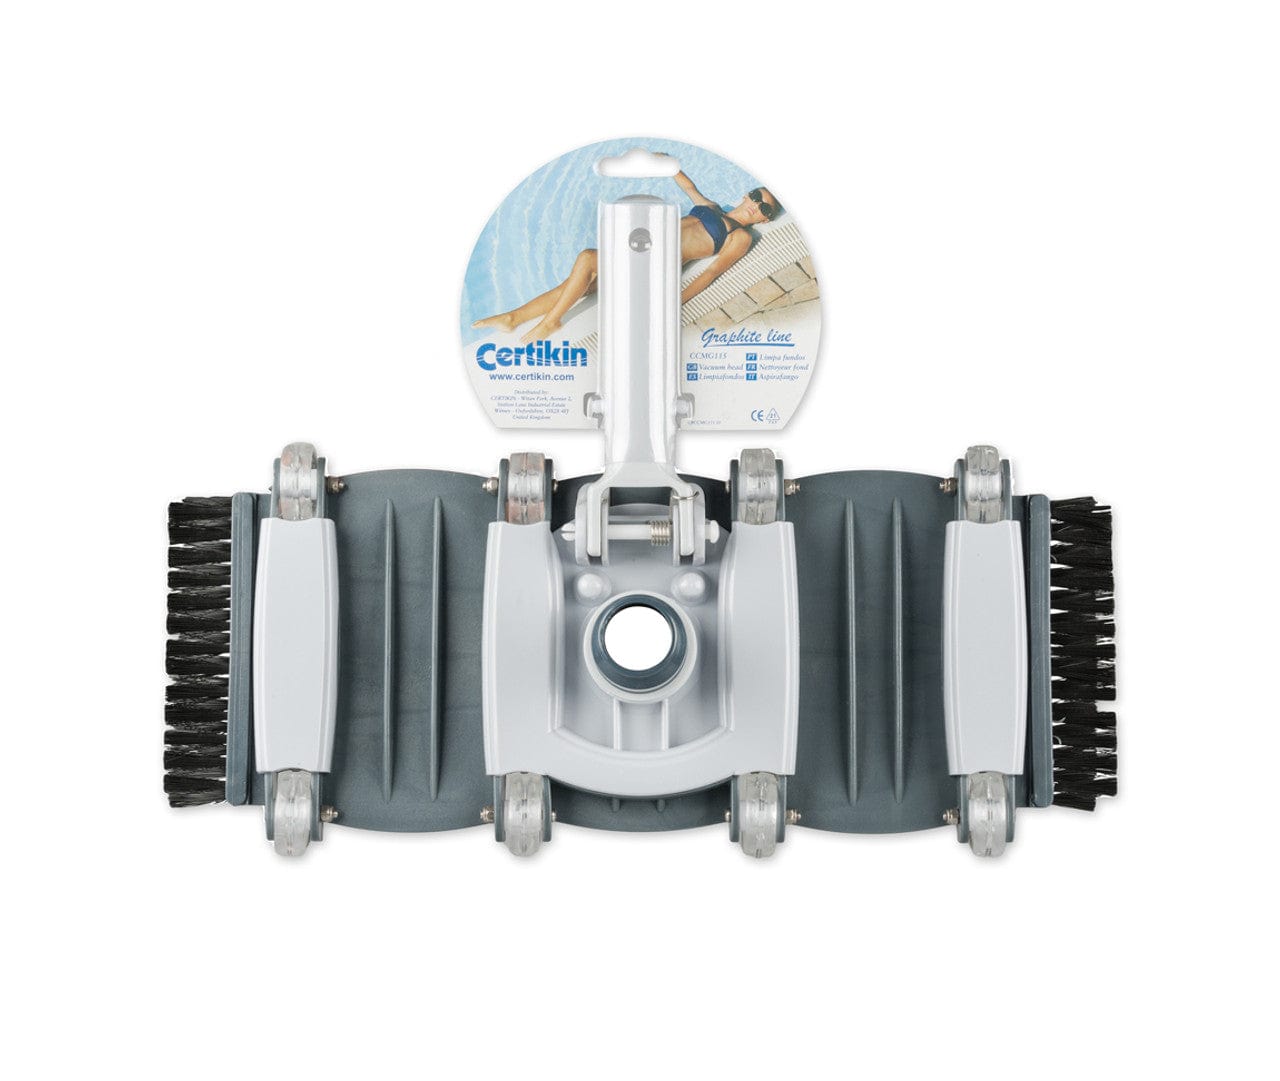 Certikin Graphite Flexible Vacuum Head With Side Brushes 9" | Supply Master | Accra, Ghana Swimming Pool Accessories & Maintenance Buy Tools hardware Building materials